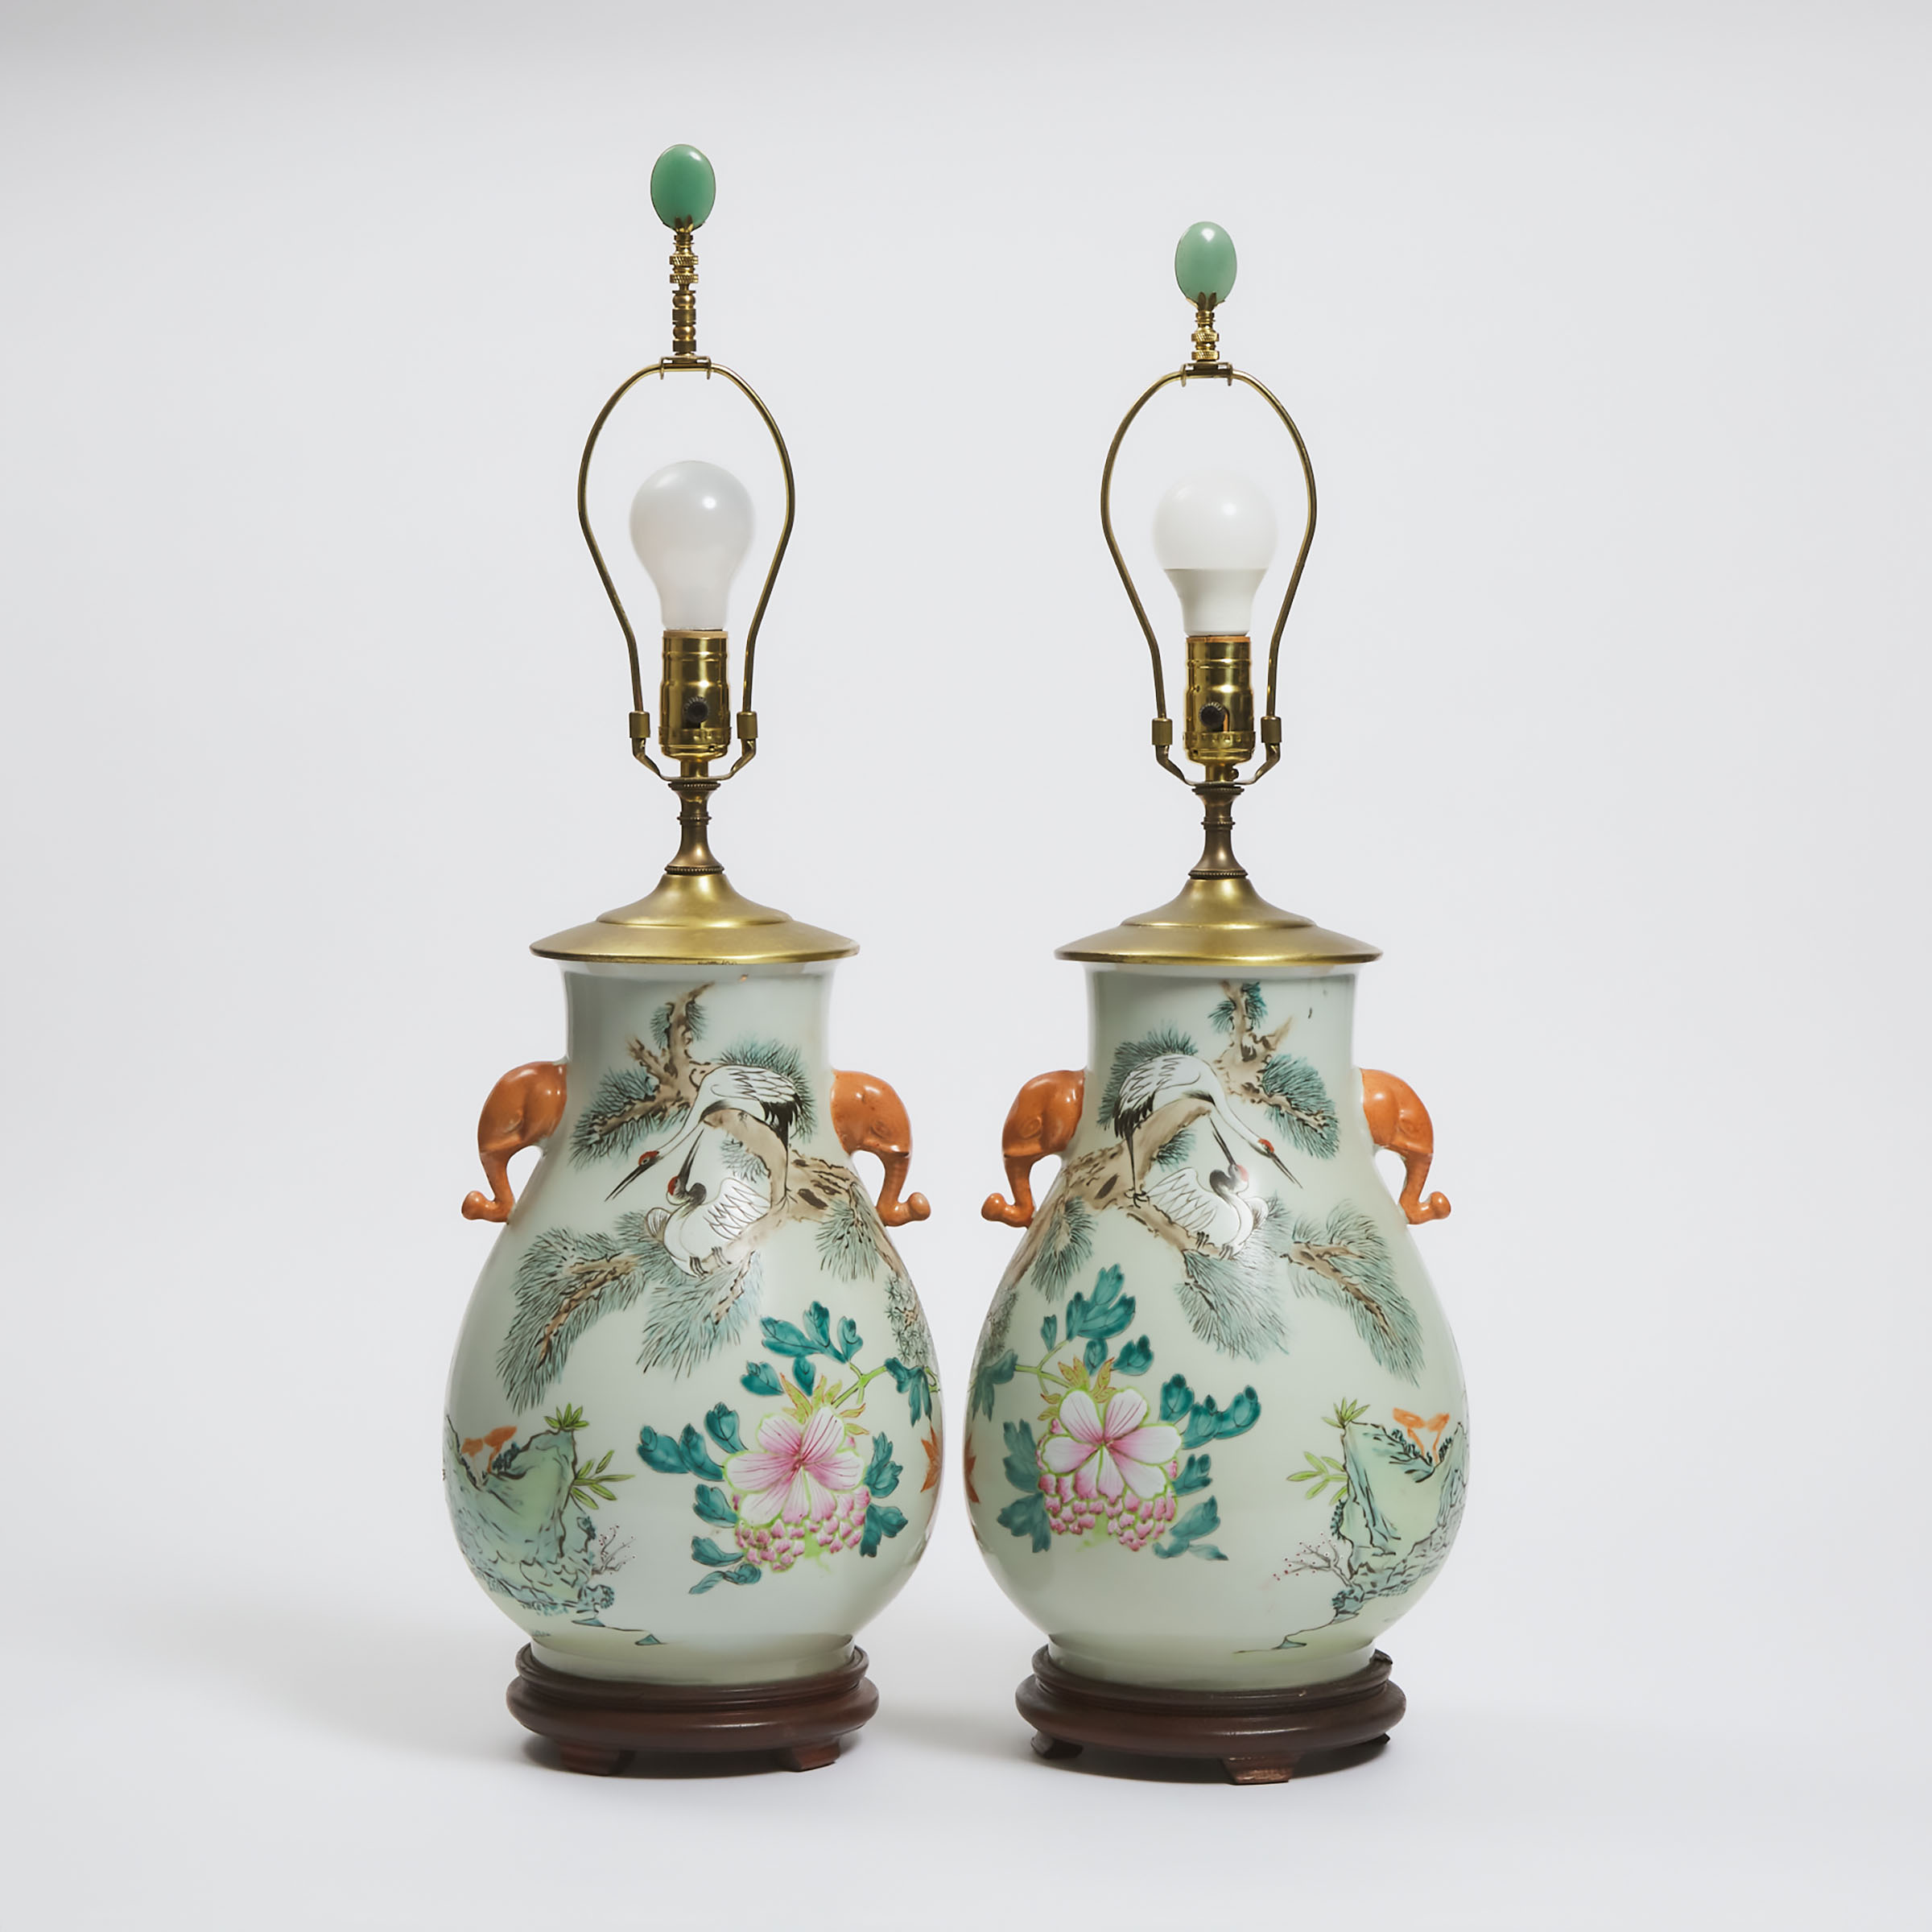 A Pair of Enameled 'Deer and Crane' Hu-Form Vase Lamps, Republican Period